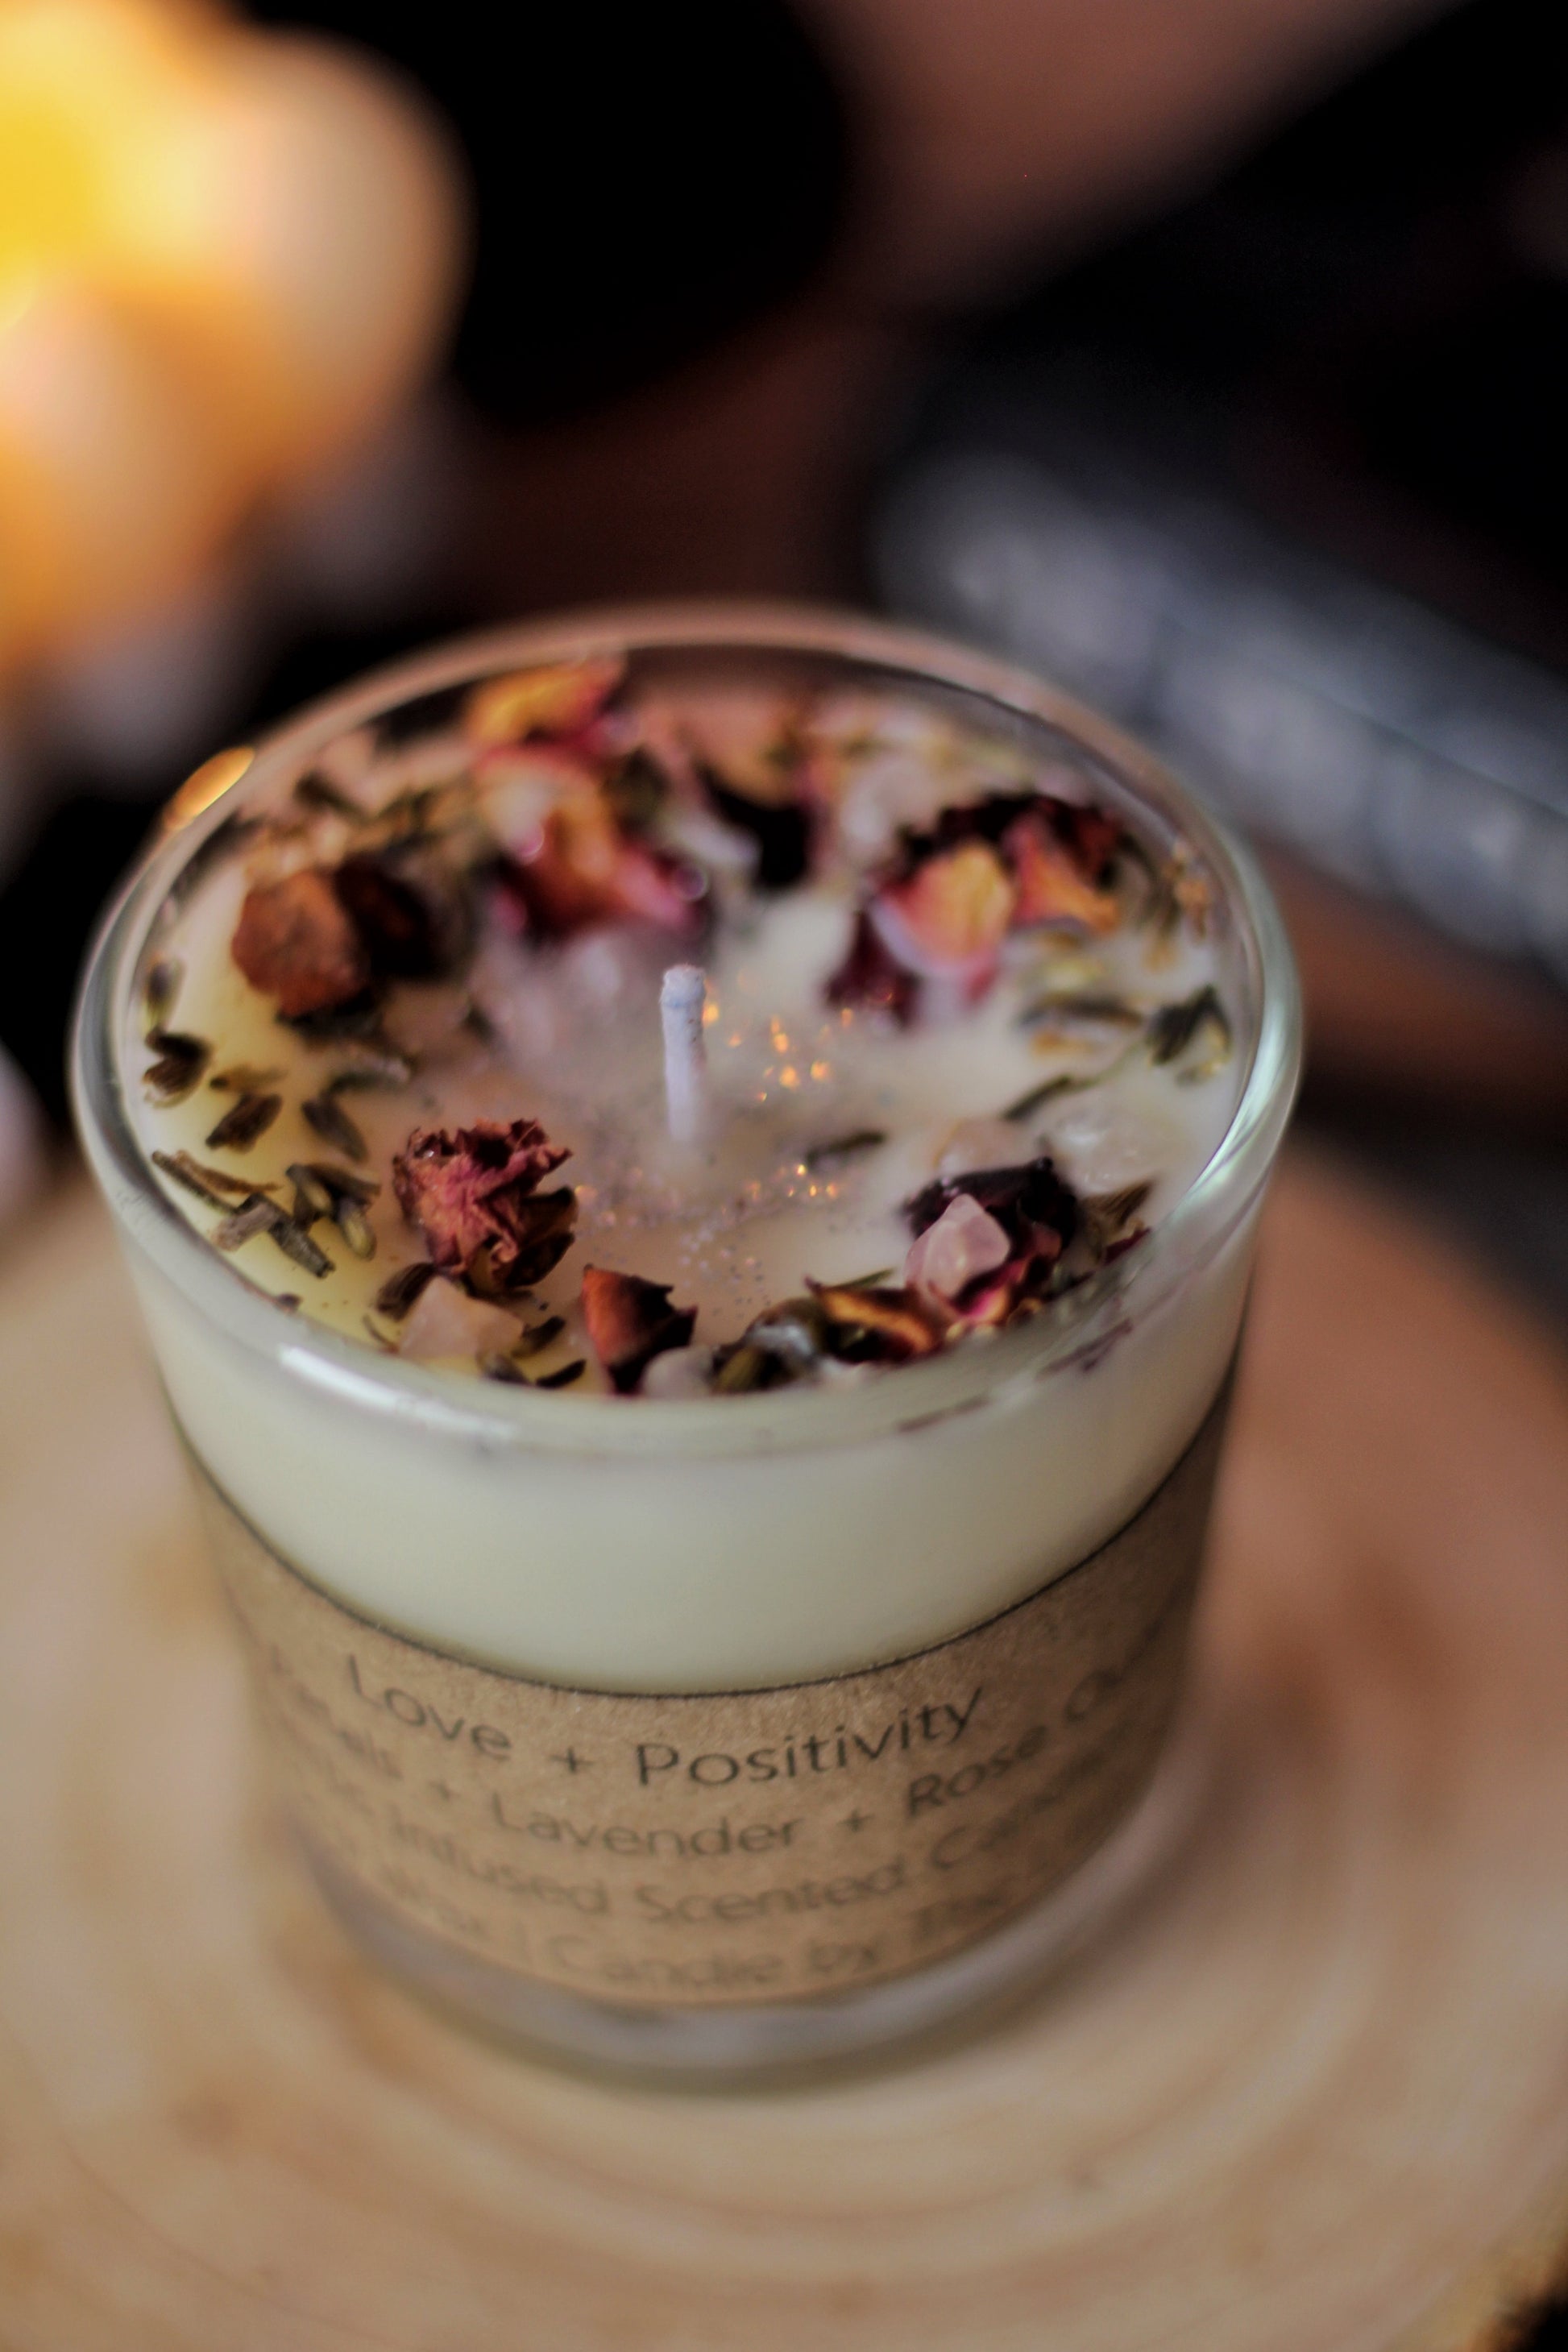 Love & Positivity Candle